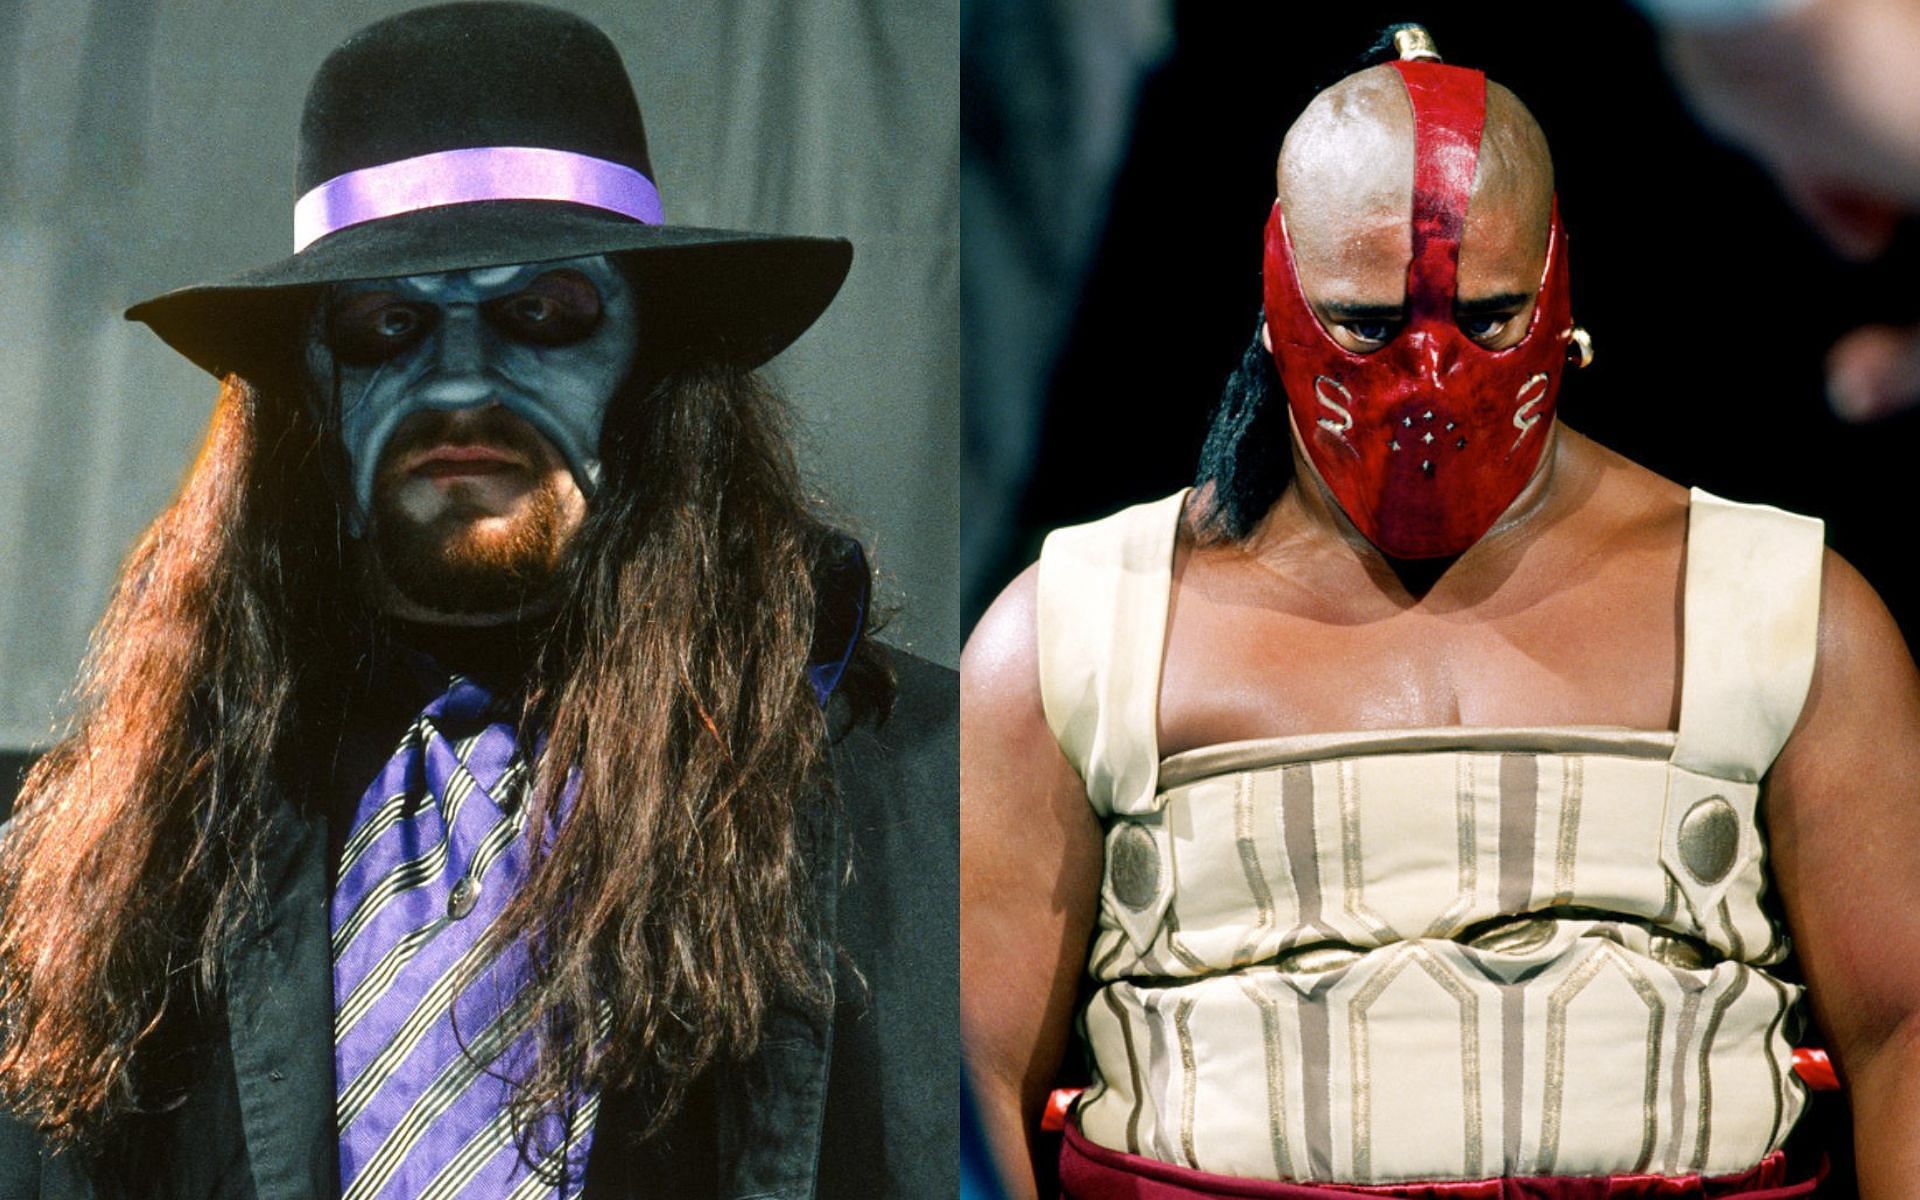 Do you remember the superstars behind these masks?